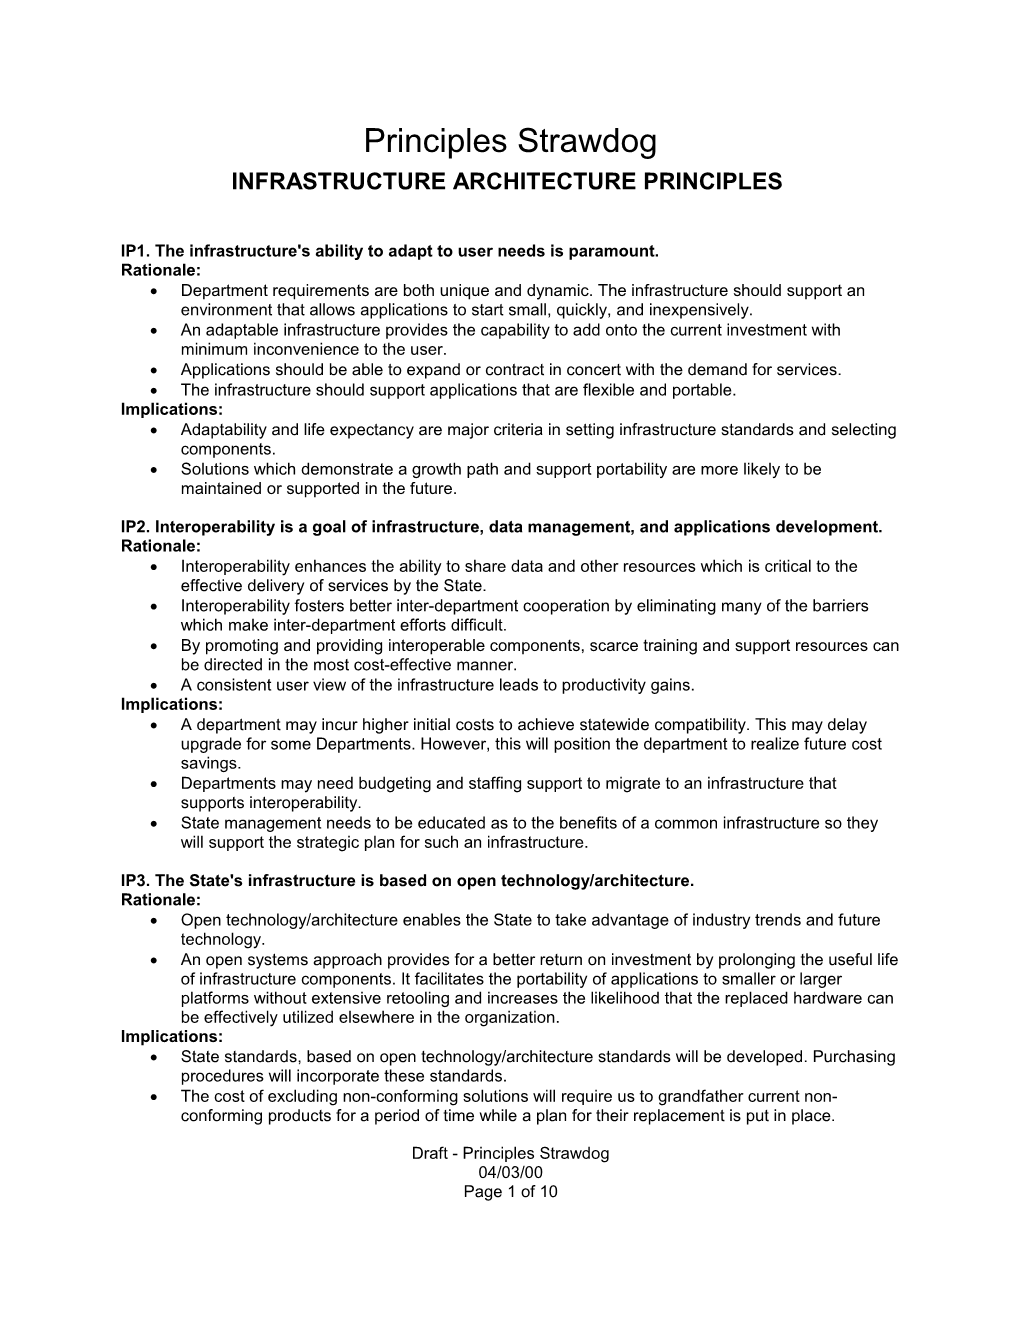 Infrastructure Architecture Principles